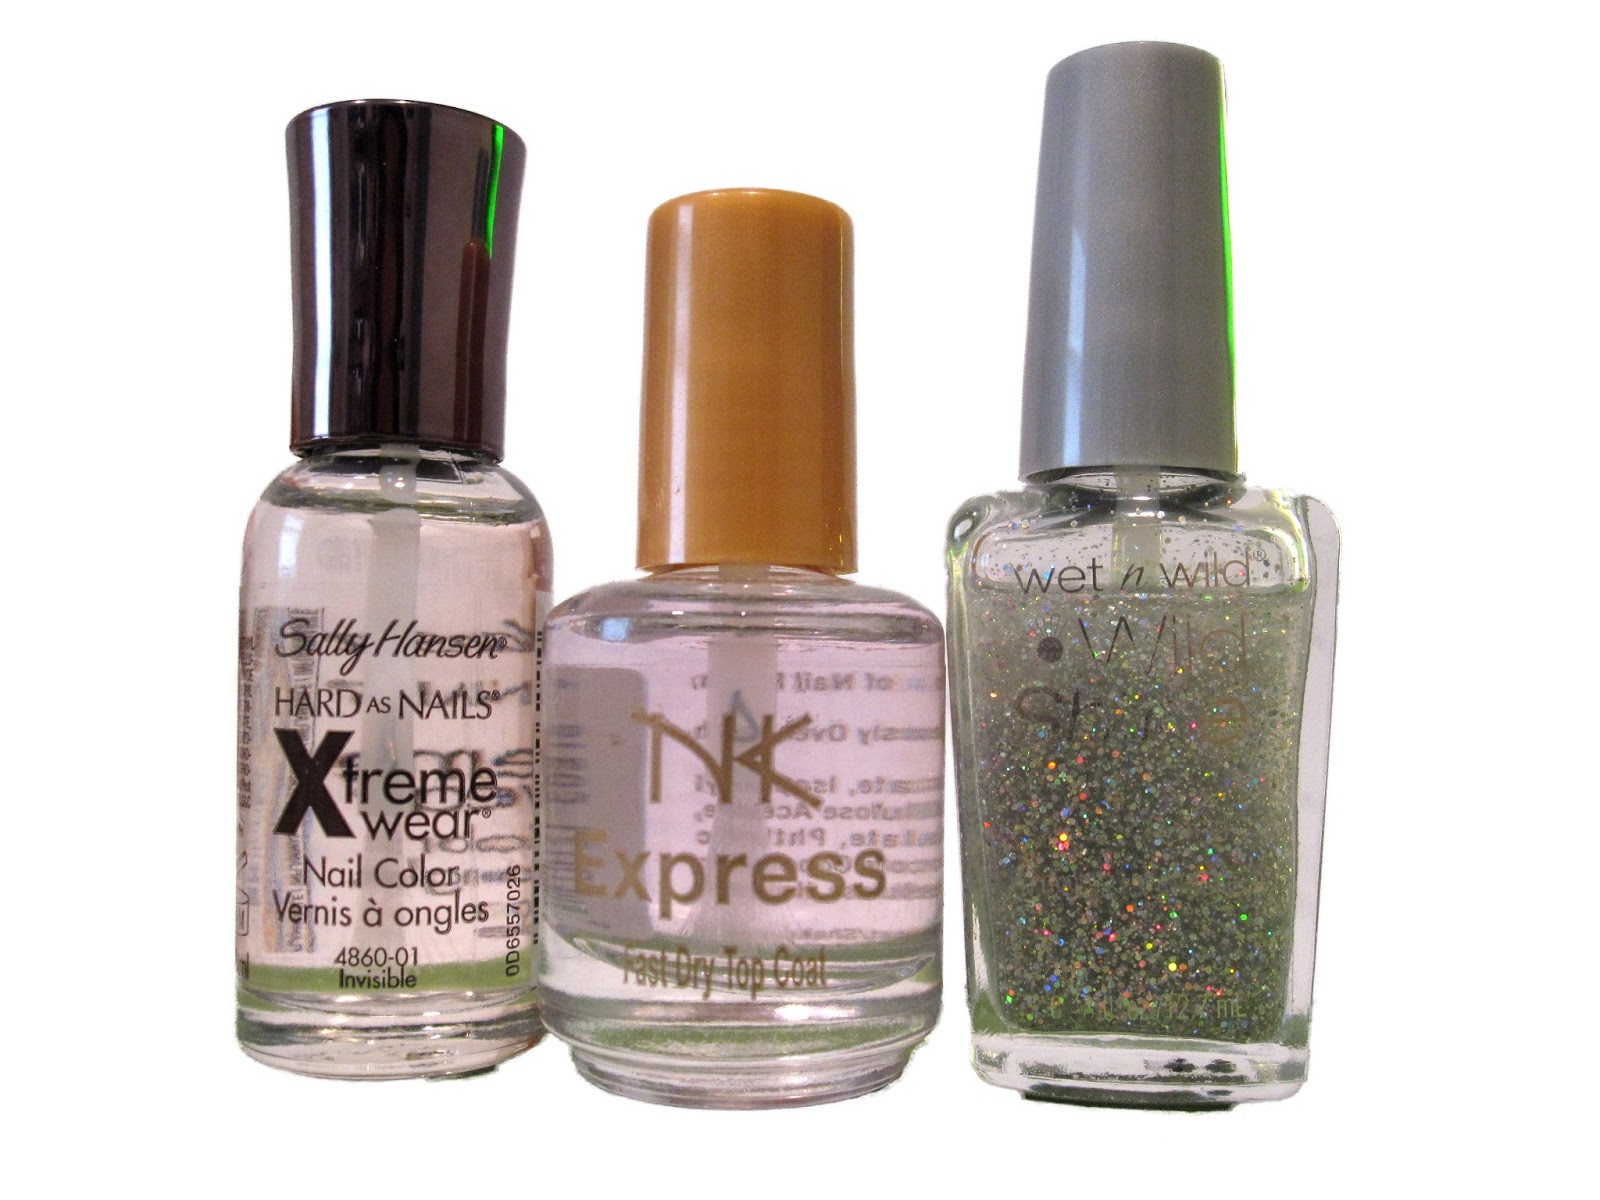 3. Sally Hansen Hard as Nails Xtreme Wear in White On - wide 6